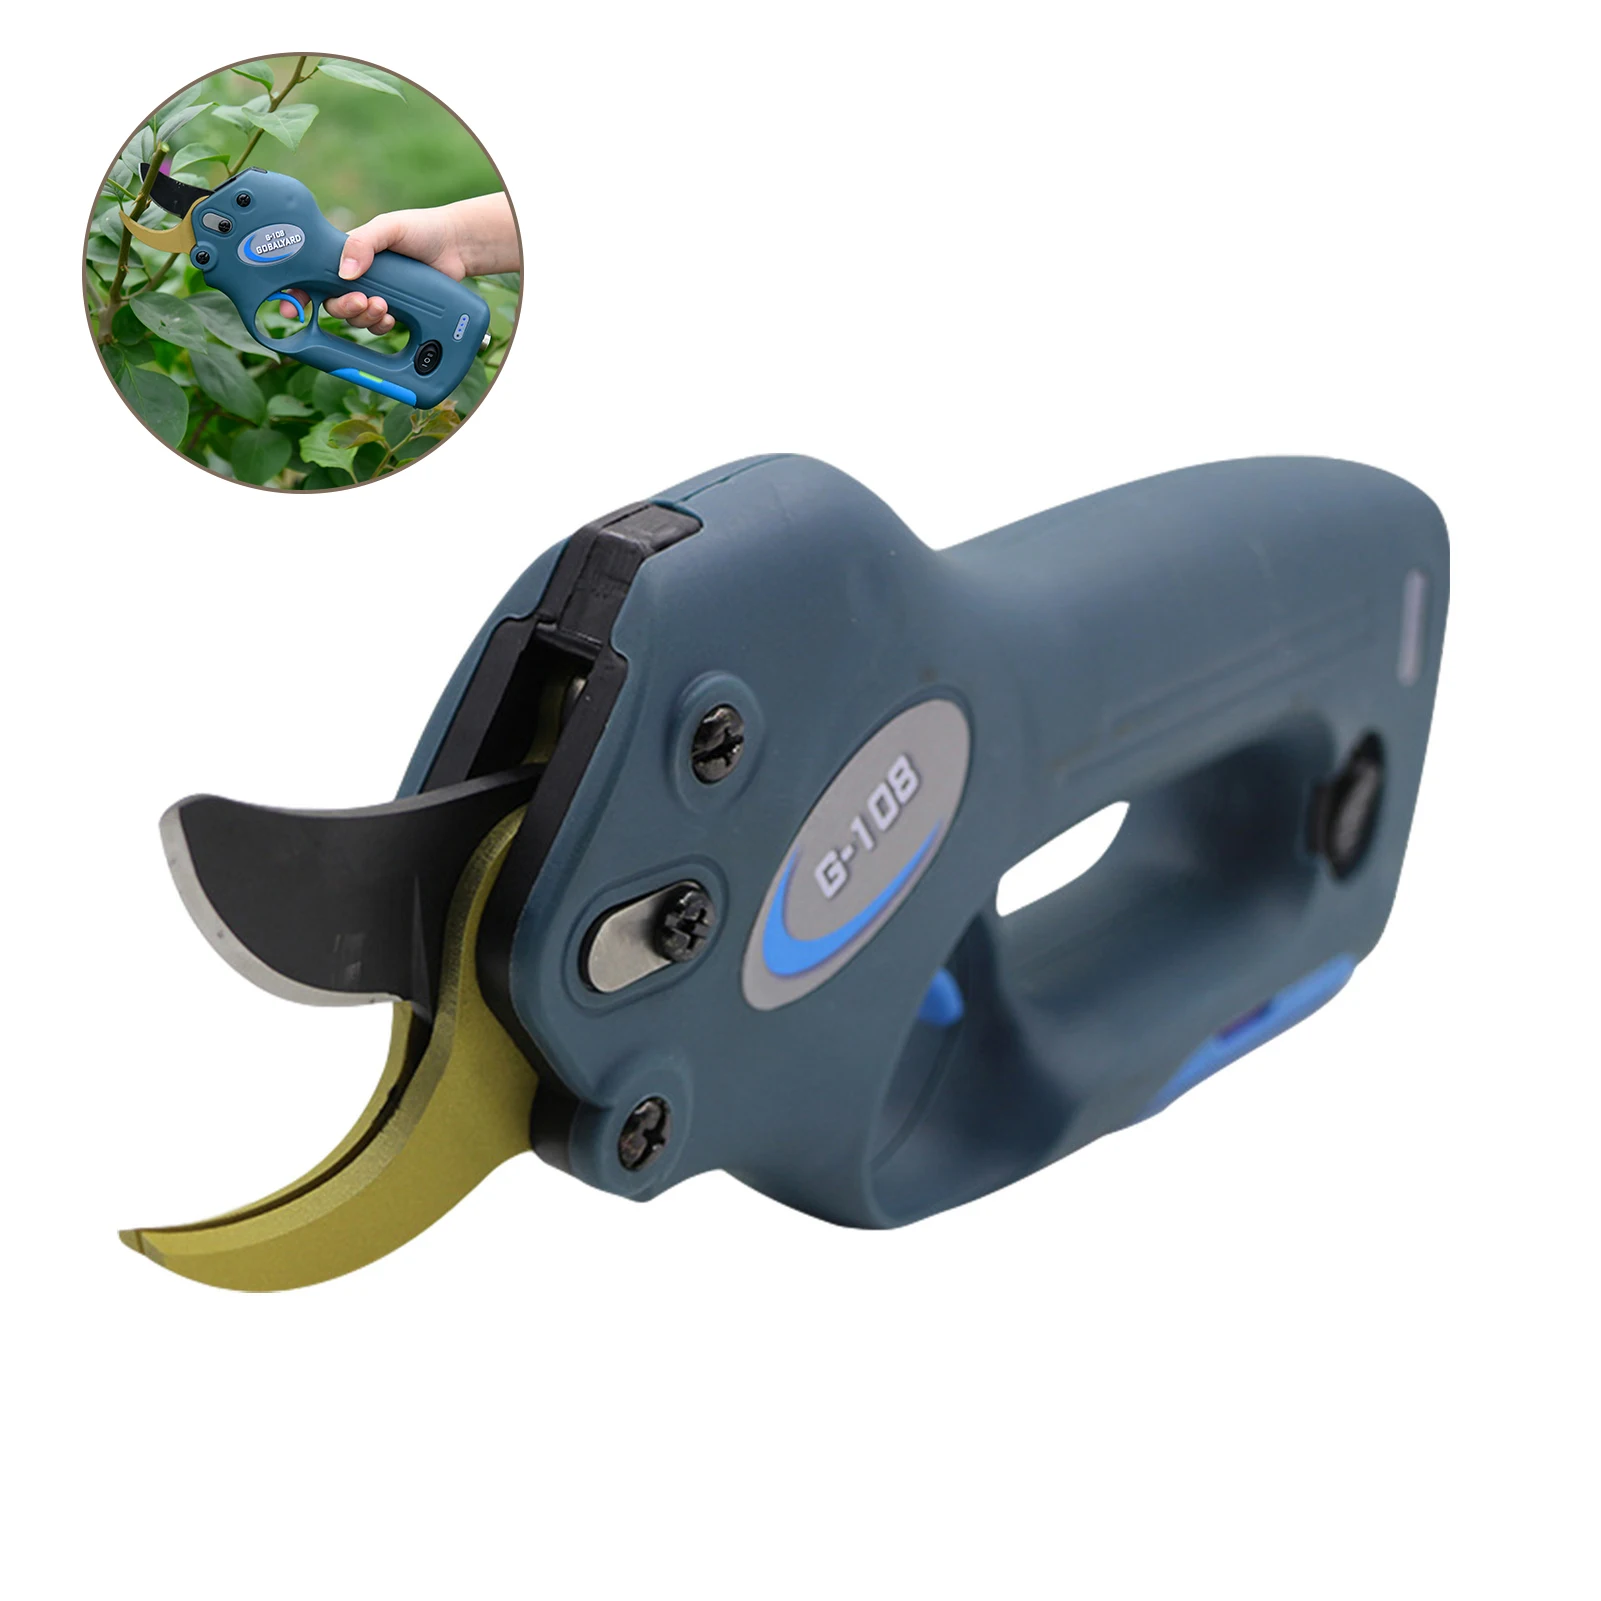 Wired Cordless Electric Pruning Shears Lithium Battery Lawn Mower Weeding Shear Pruning Mower Garden Tools